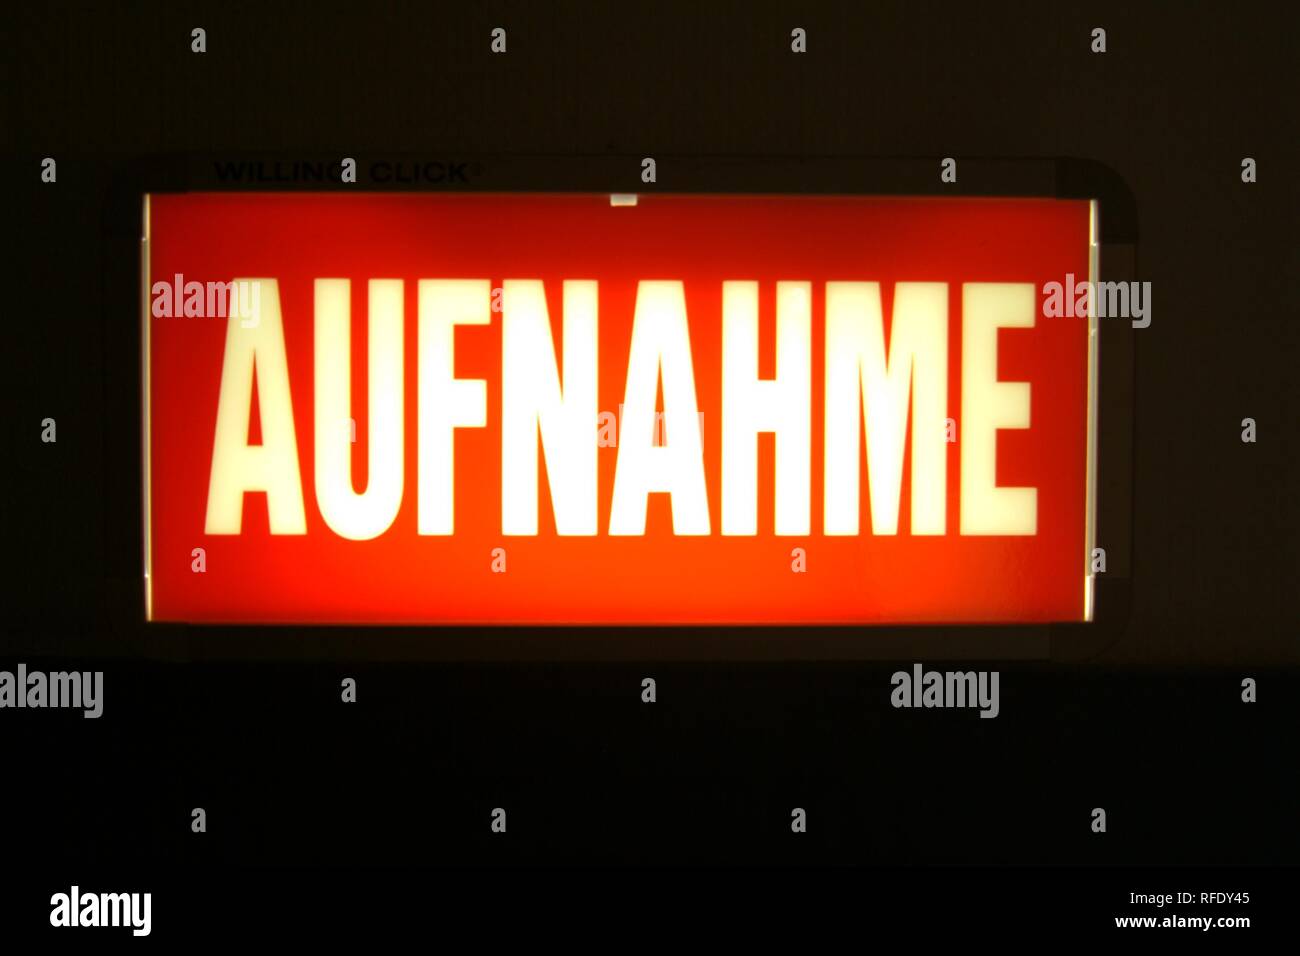 'Aufnahme' sign in a TV studio, Germany Stock Photo